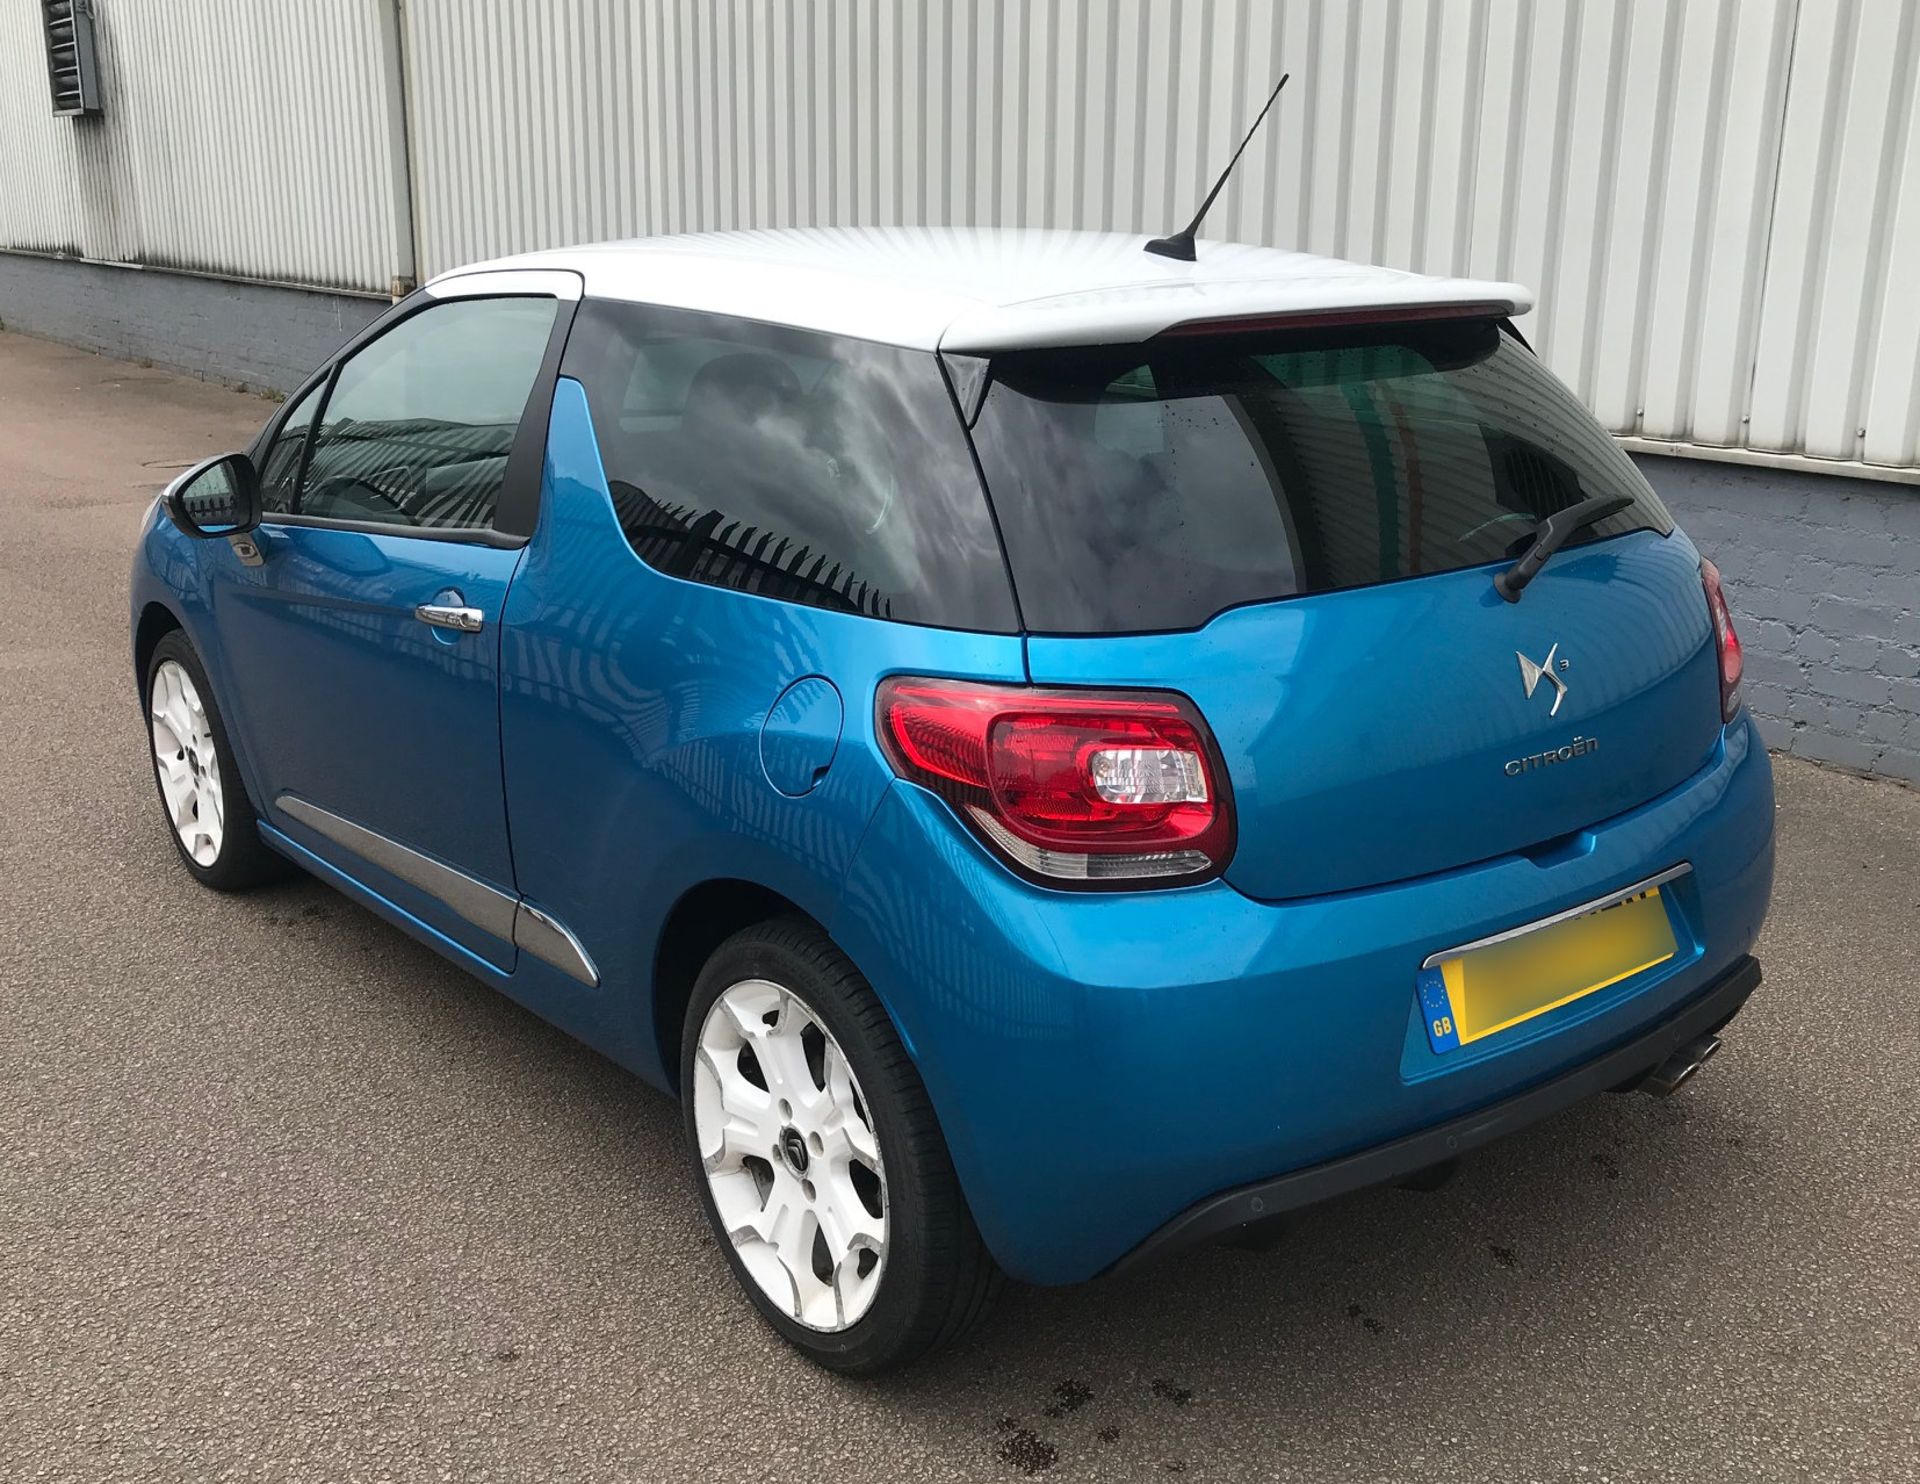 2013 Citroen DS3 1.6 e-HDi 110 Airdream DSport Plus 3dr Hatchback - CL505 - NO VAT ON THE HAMMER - Image 14 of 15